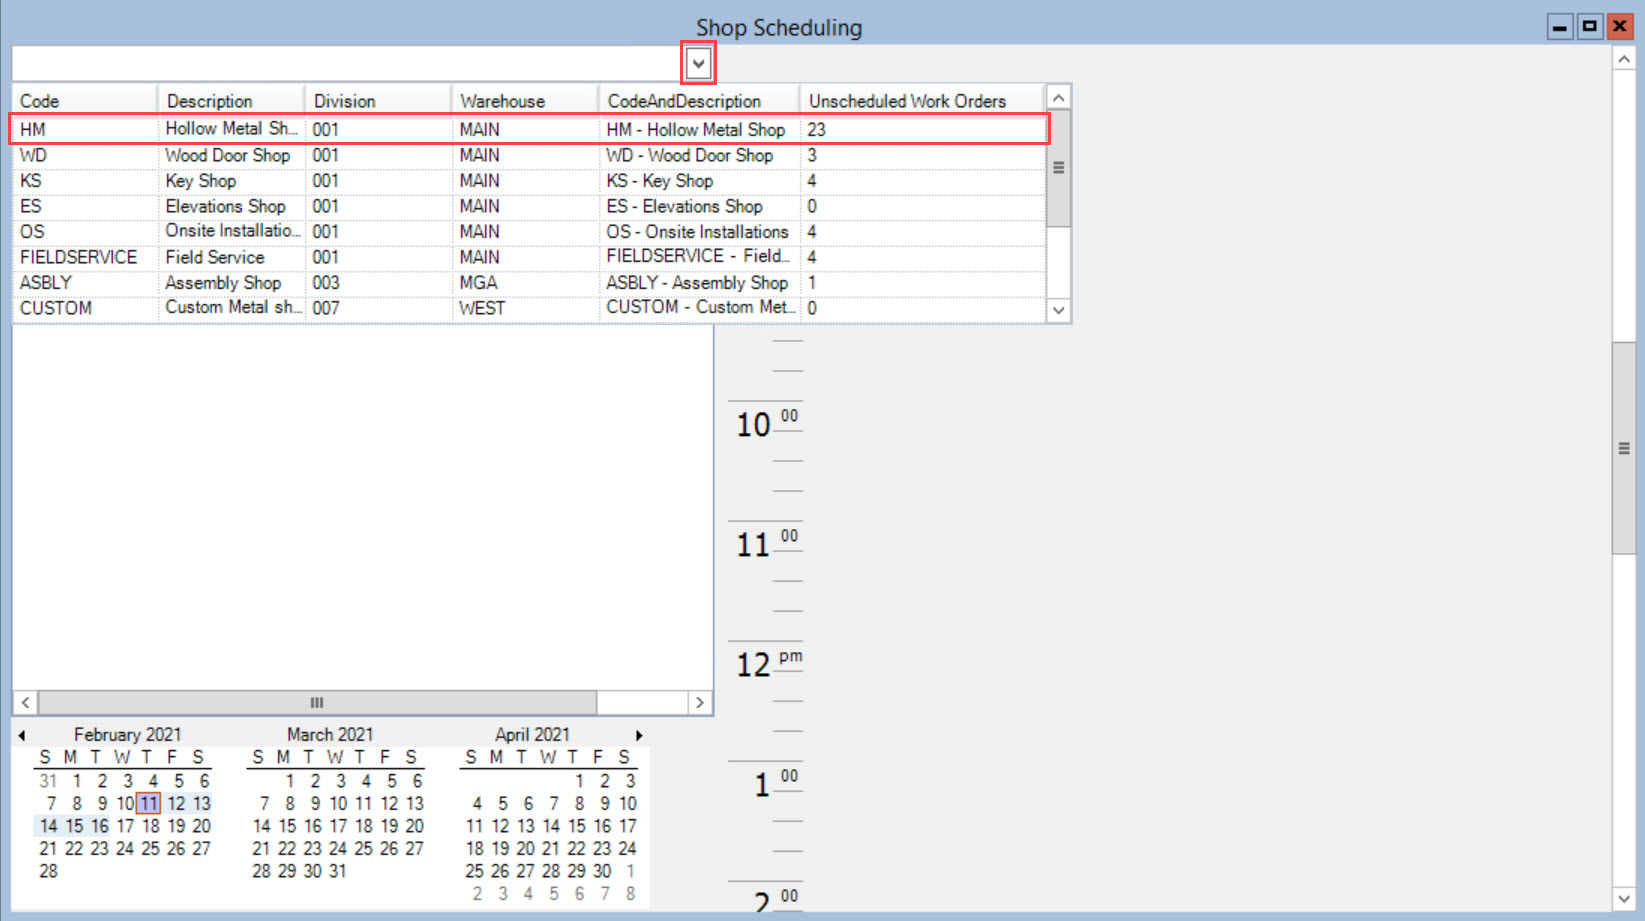 Shop Scheduling window; shows the location of the down arrow and the drop-down list.